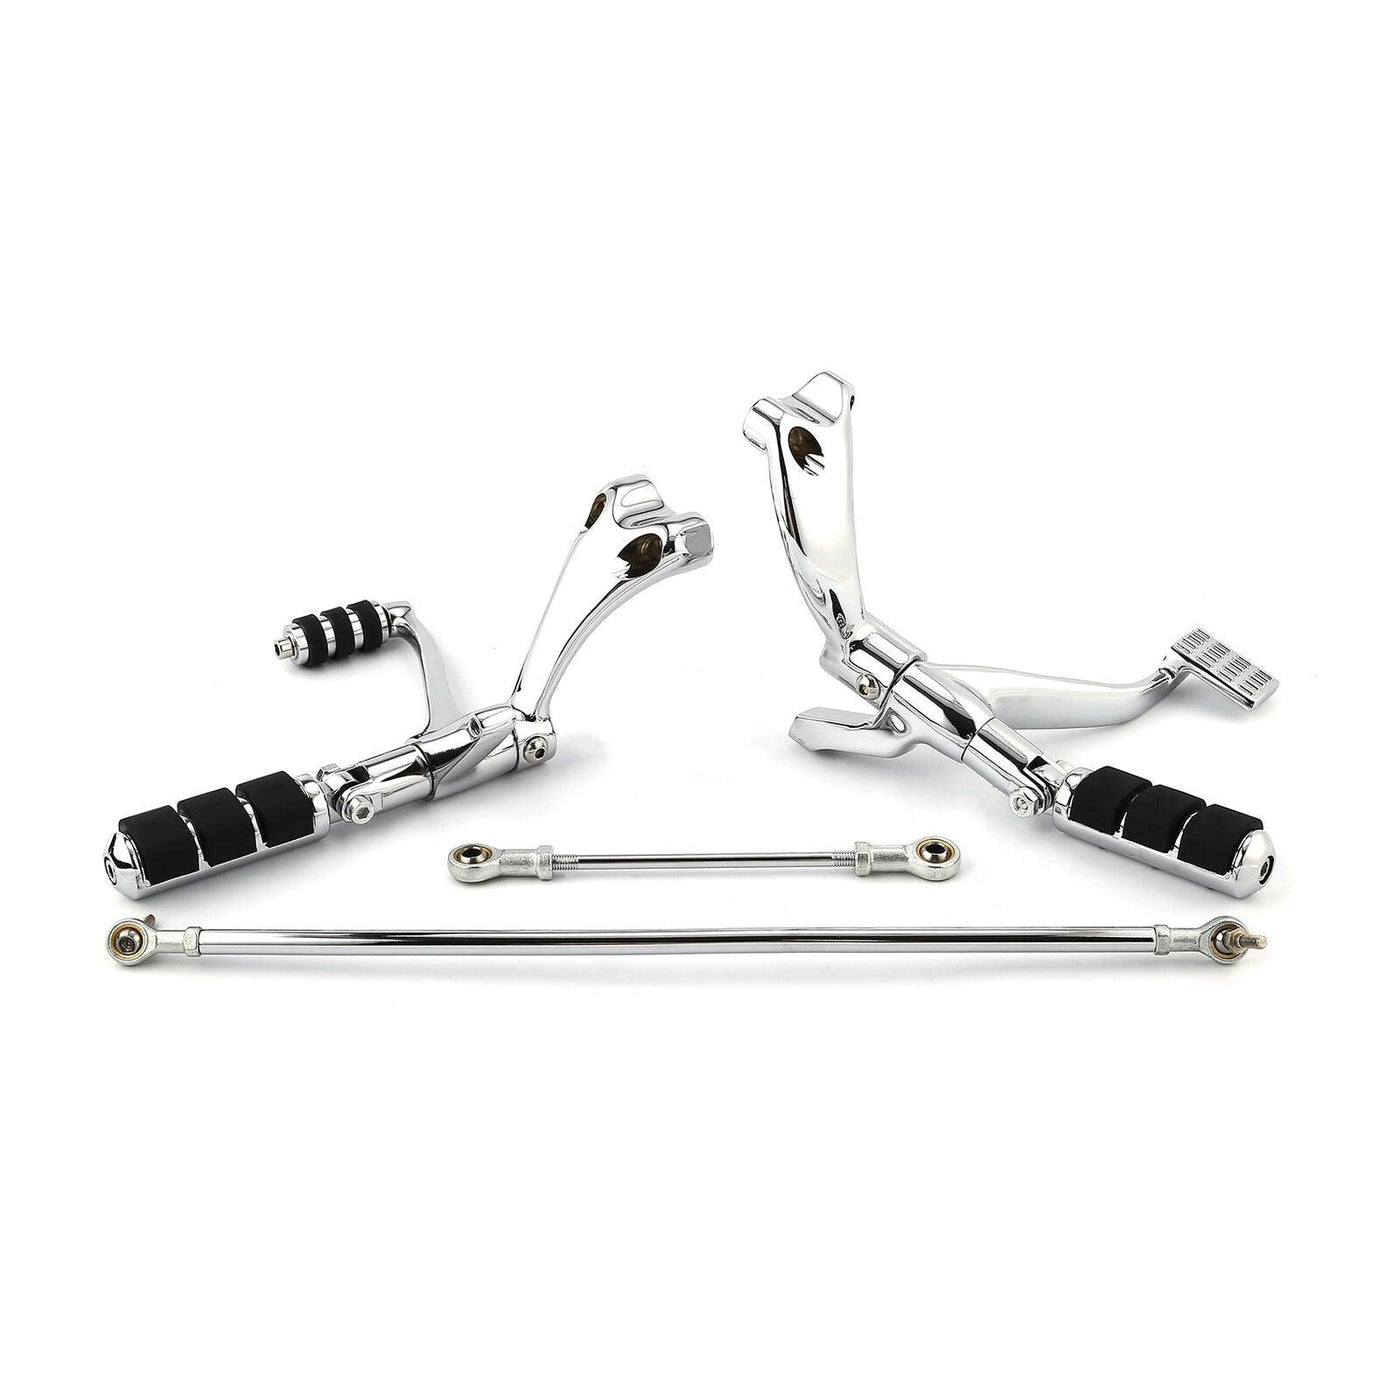 Forward Controls Pegs Levers Linkages Fit For Harley Sportster XL883 1200 04-13 - Moto Life Products